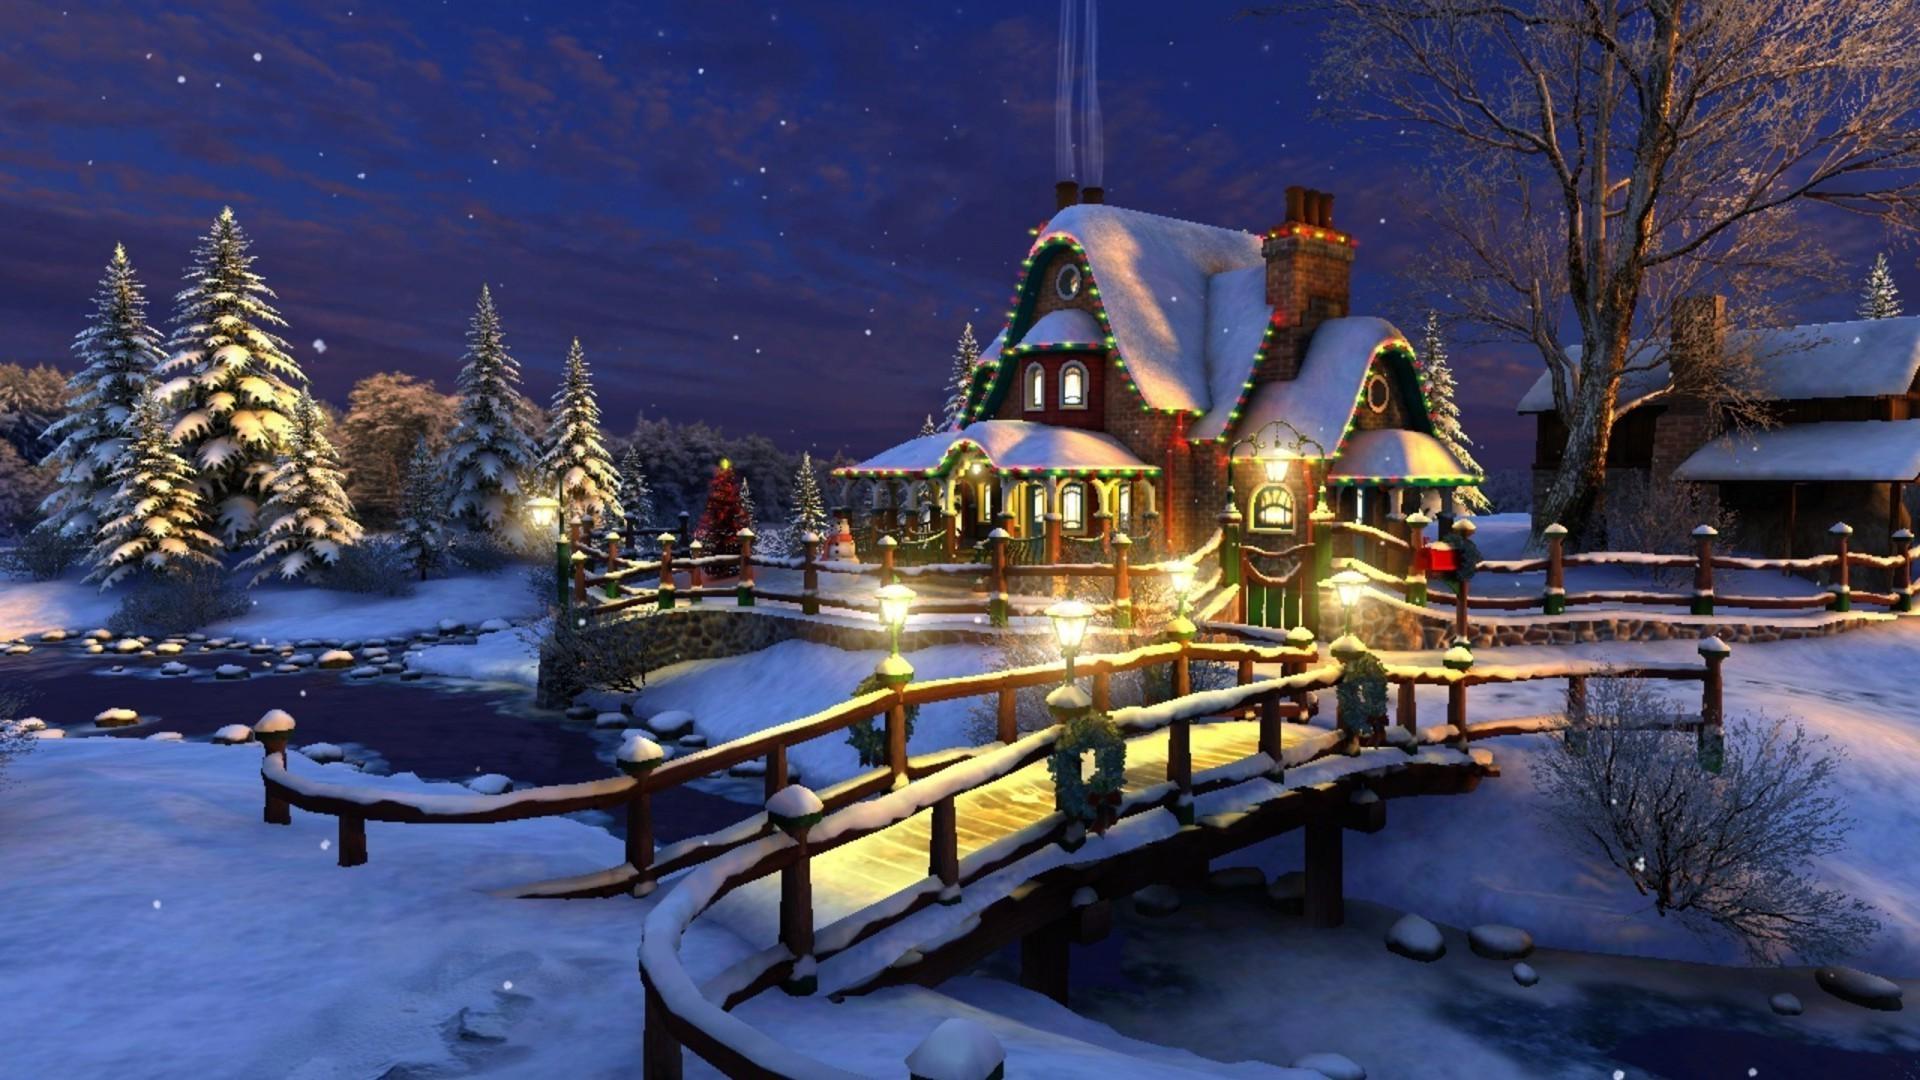 Nice house in the new year's eve. iPhone wallpaper for free